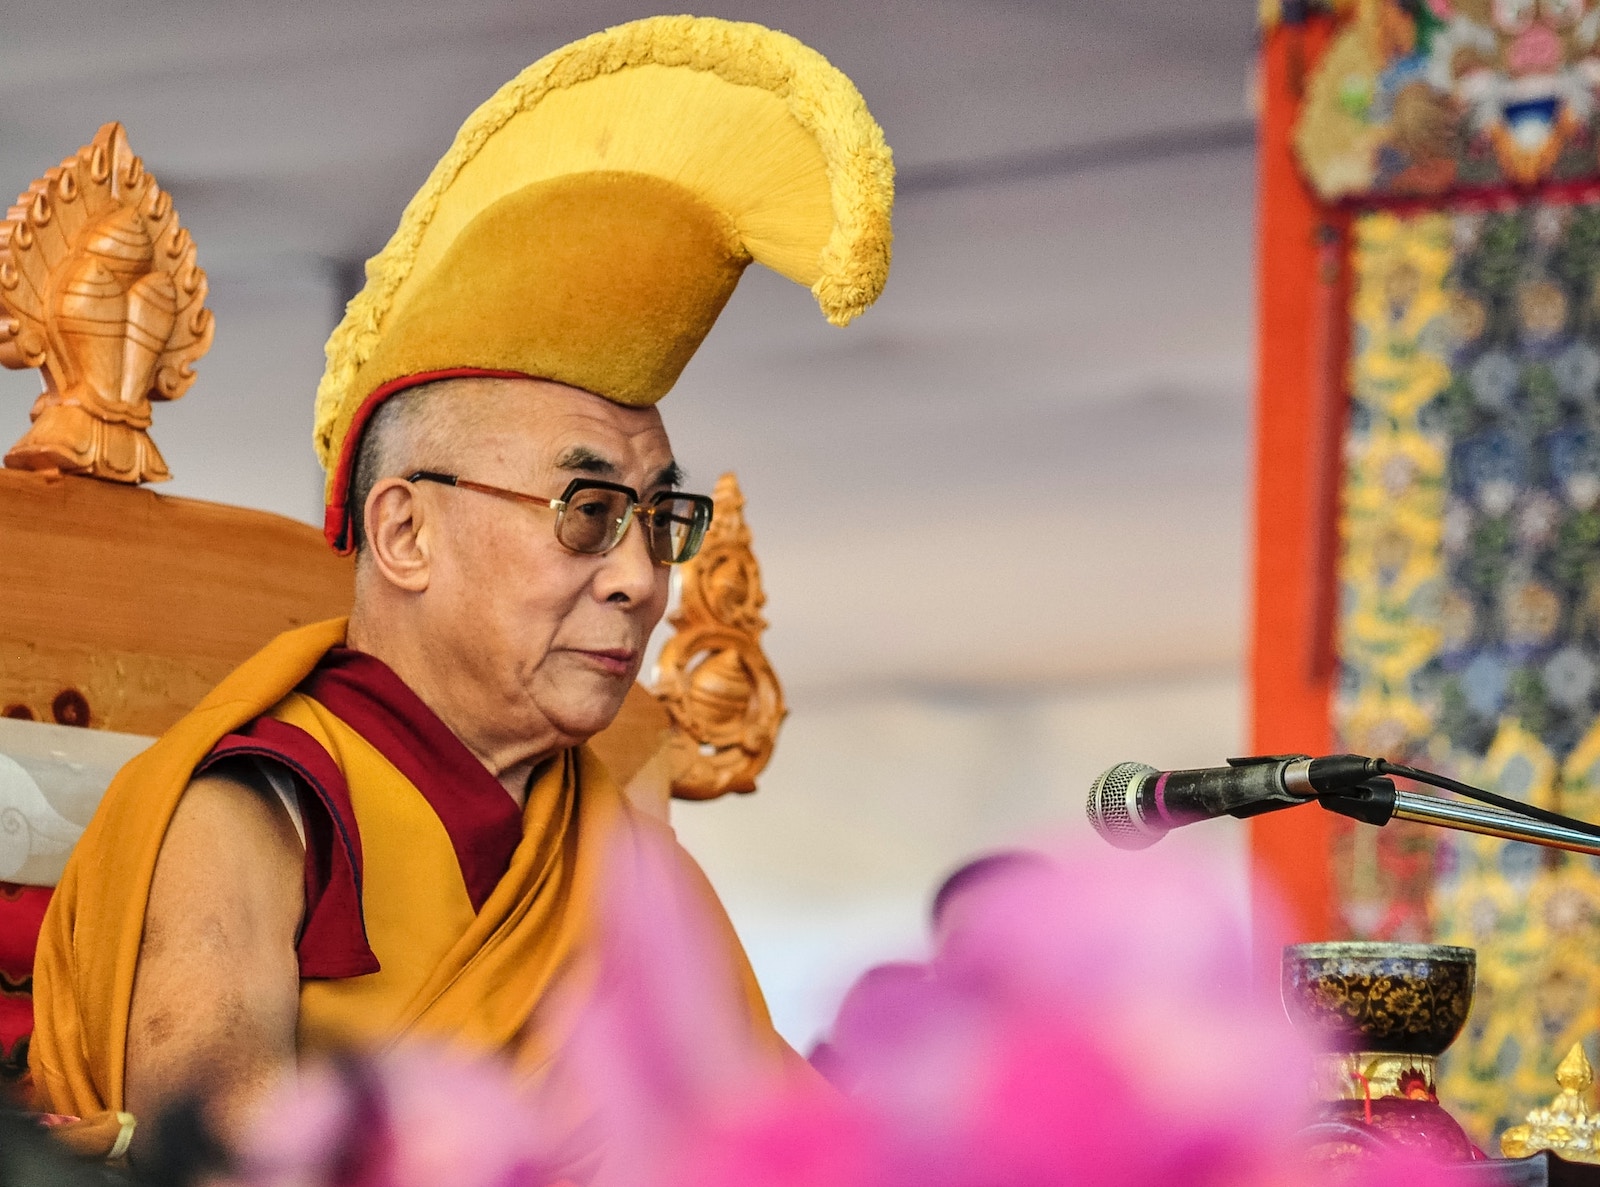 Dalai Lama Apologizes Over an Exchange with a Child 